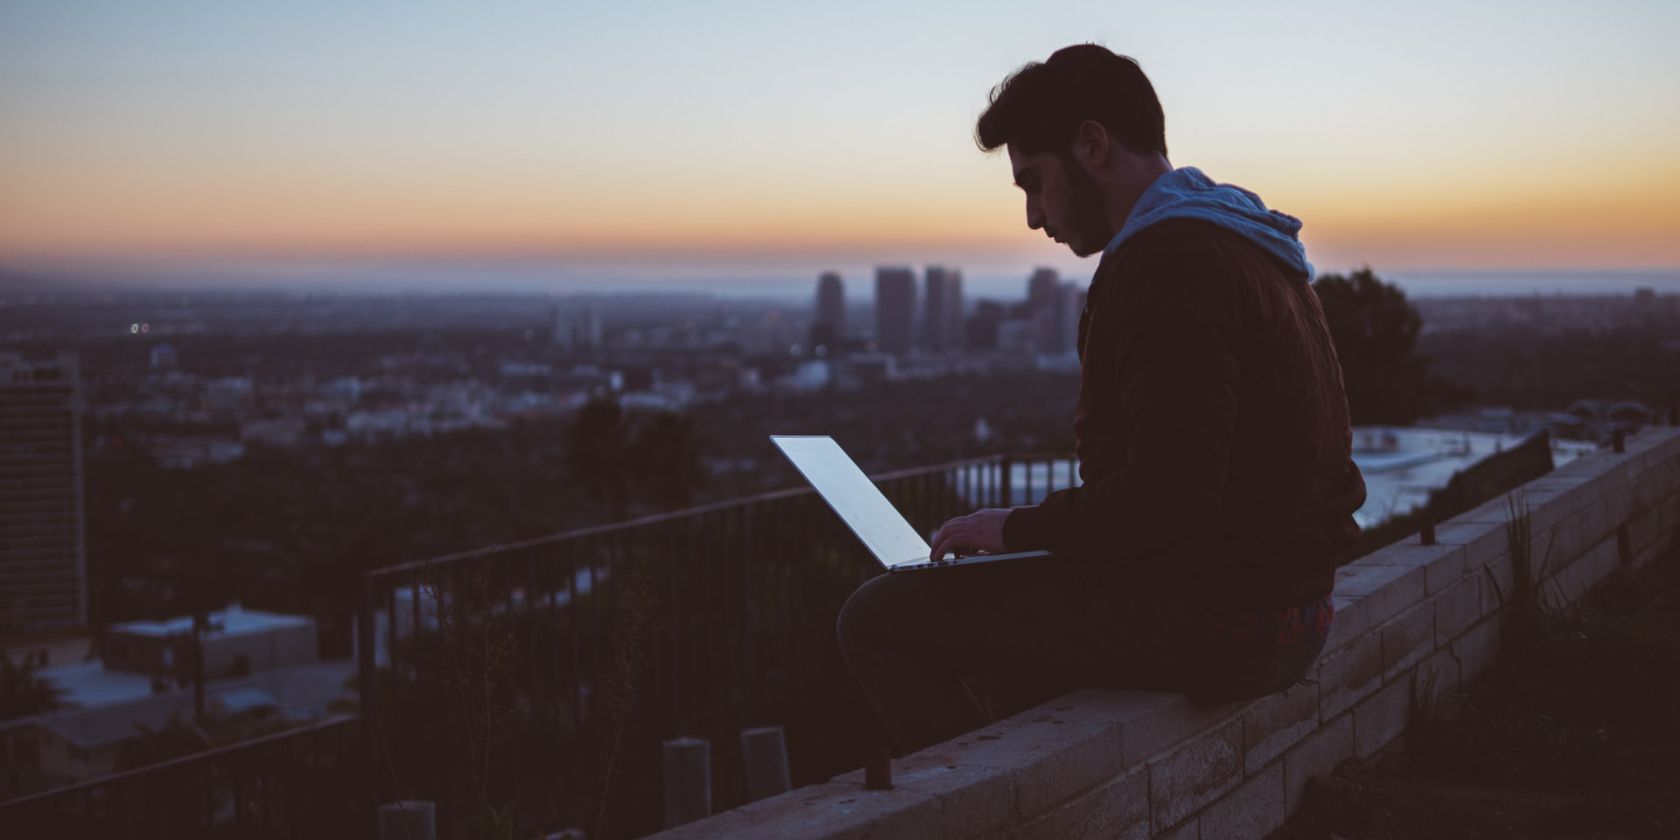 Remote Work Concept Image depicting a man working on a laptop sitting in isolation with a scenic background.